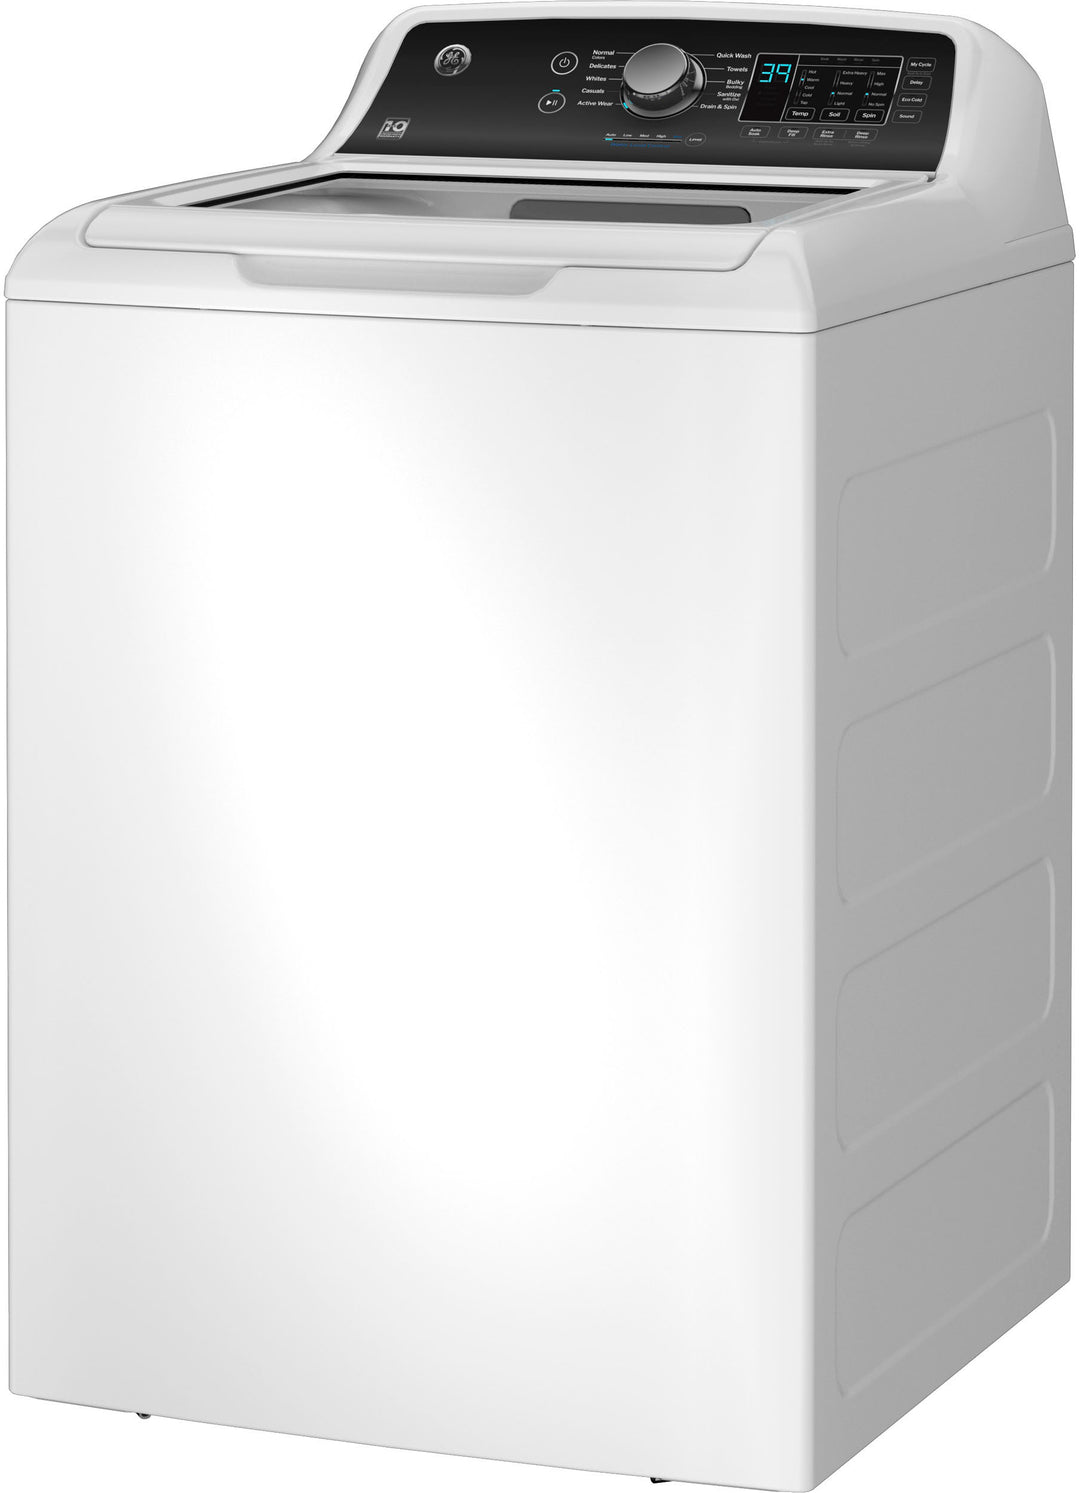 GE - 4.5 cu ft Top Load Washer with Water Level Control, Deep Fill, Quick Wash, and Glass Lid - White on White_2